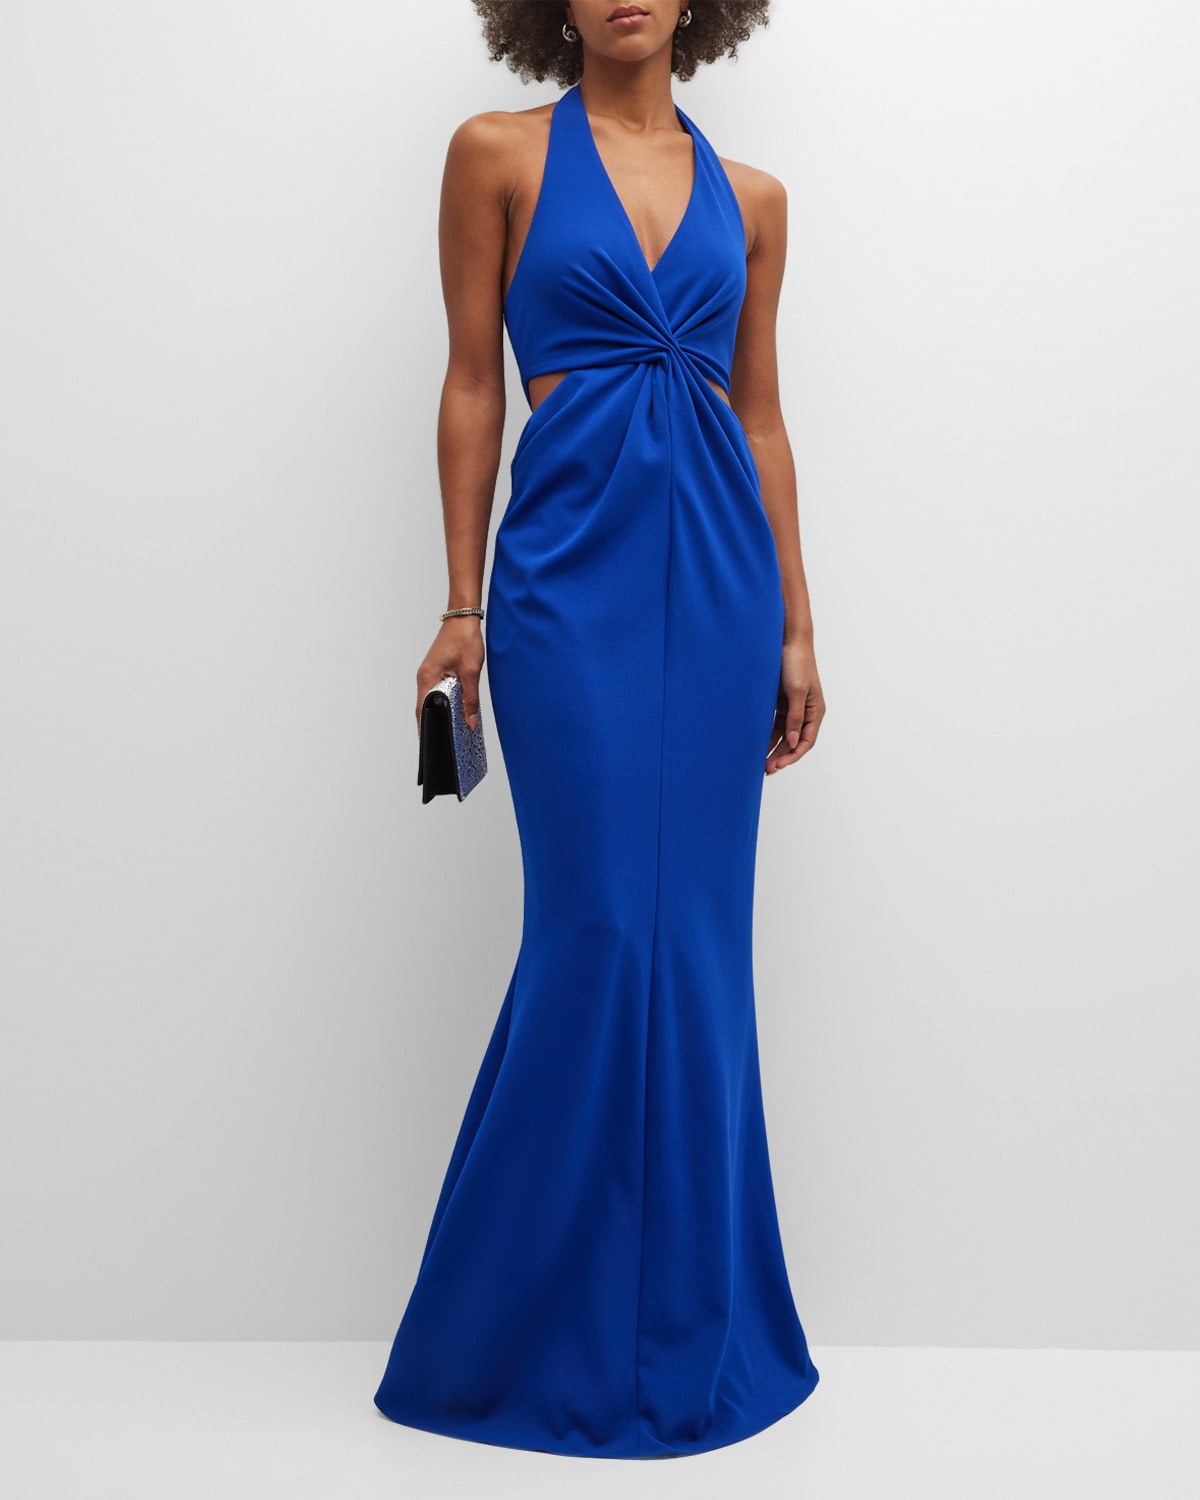 ONE33 SOCIAL TWIST-FRONT CUTOUT HALTER GOWN